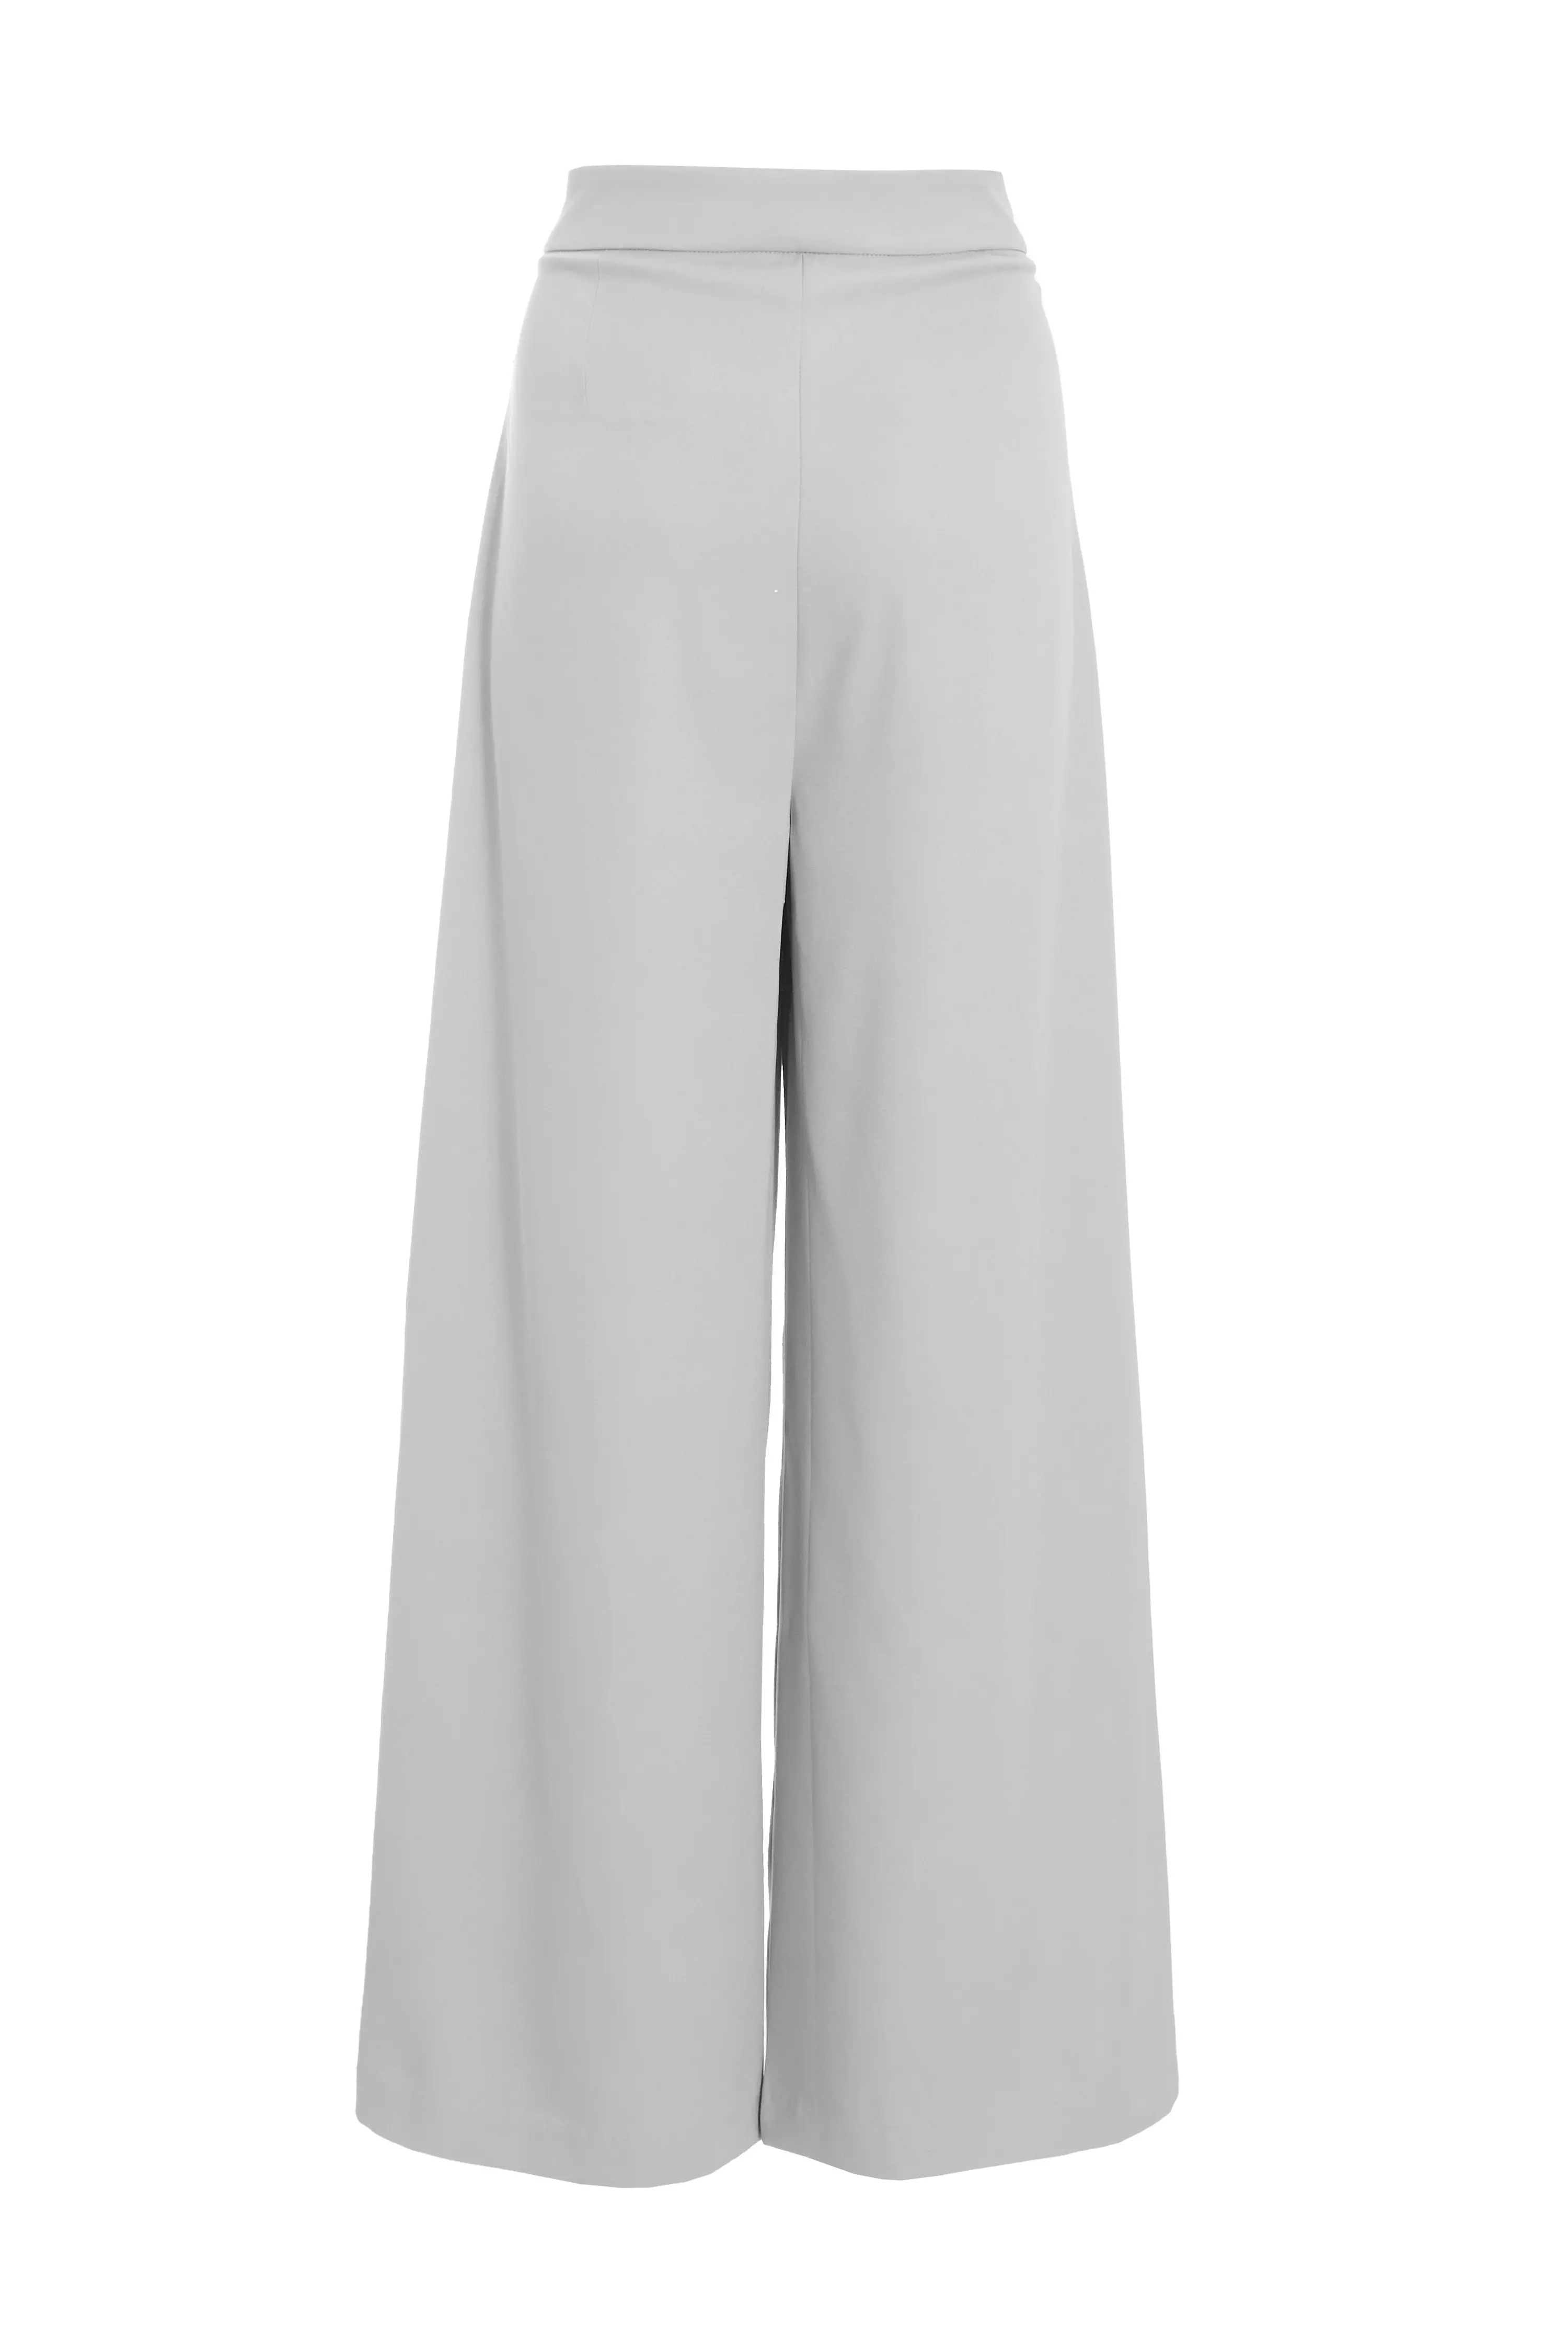 Grey High Waisted Wide Leg Trousers - QUIZ Clothing